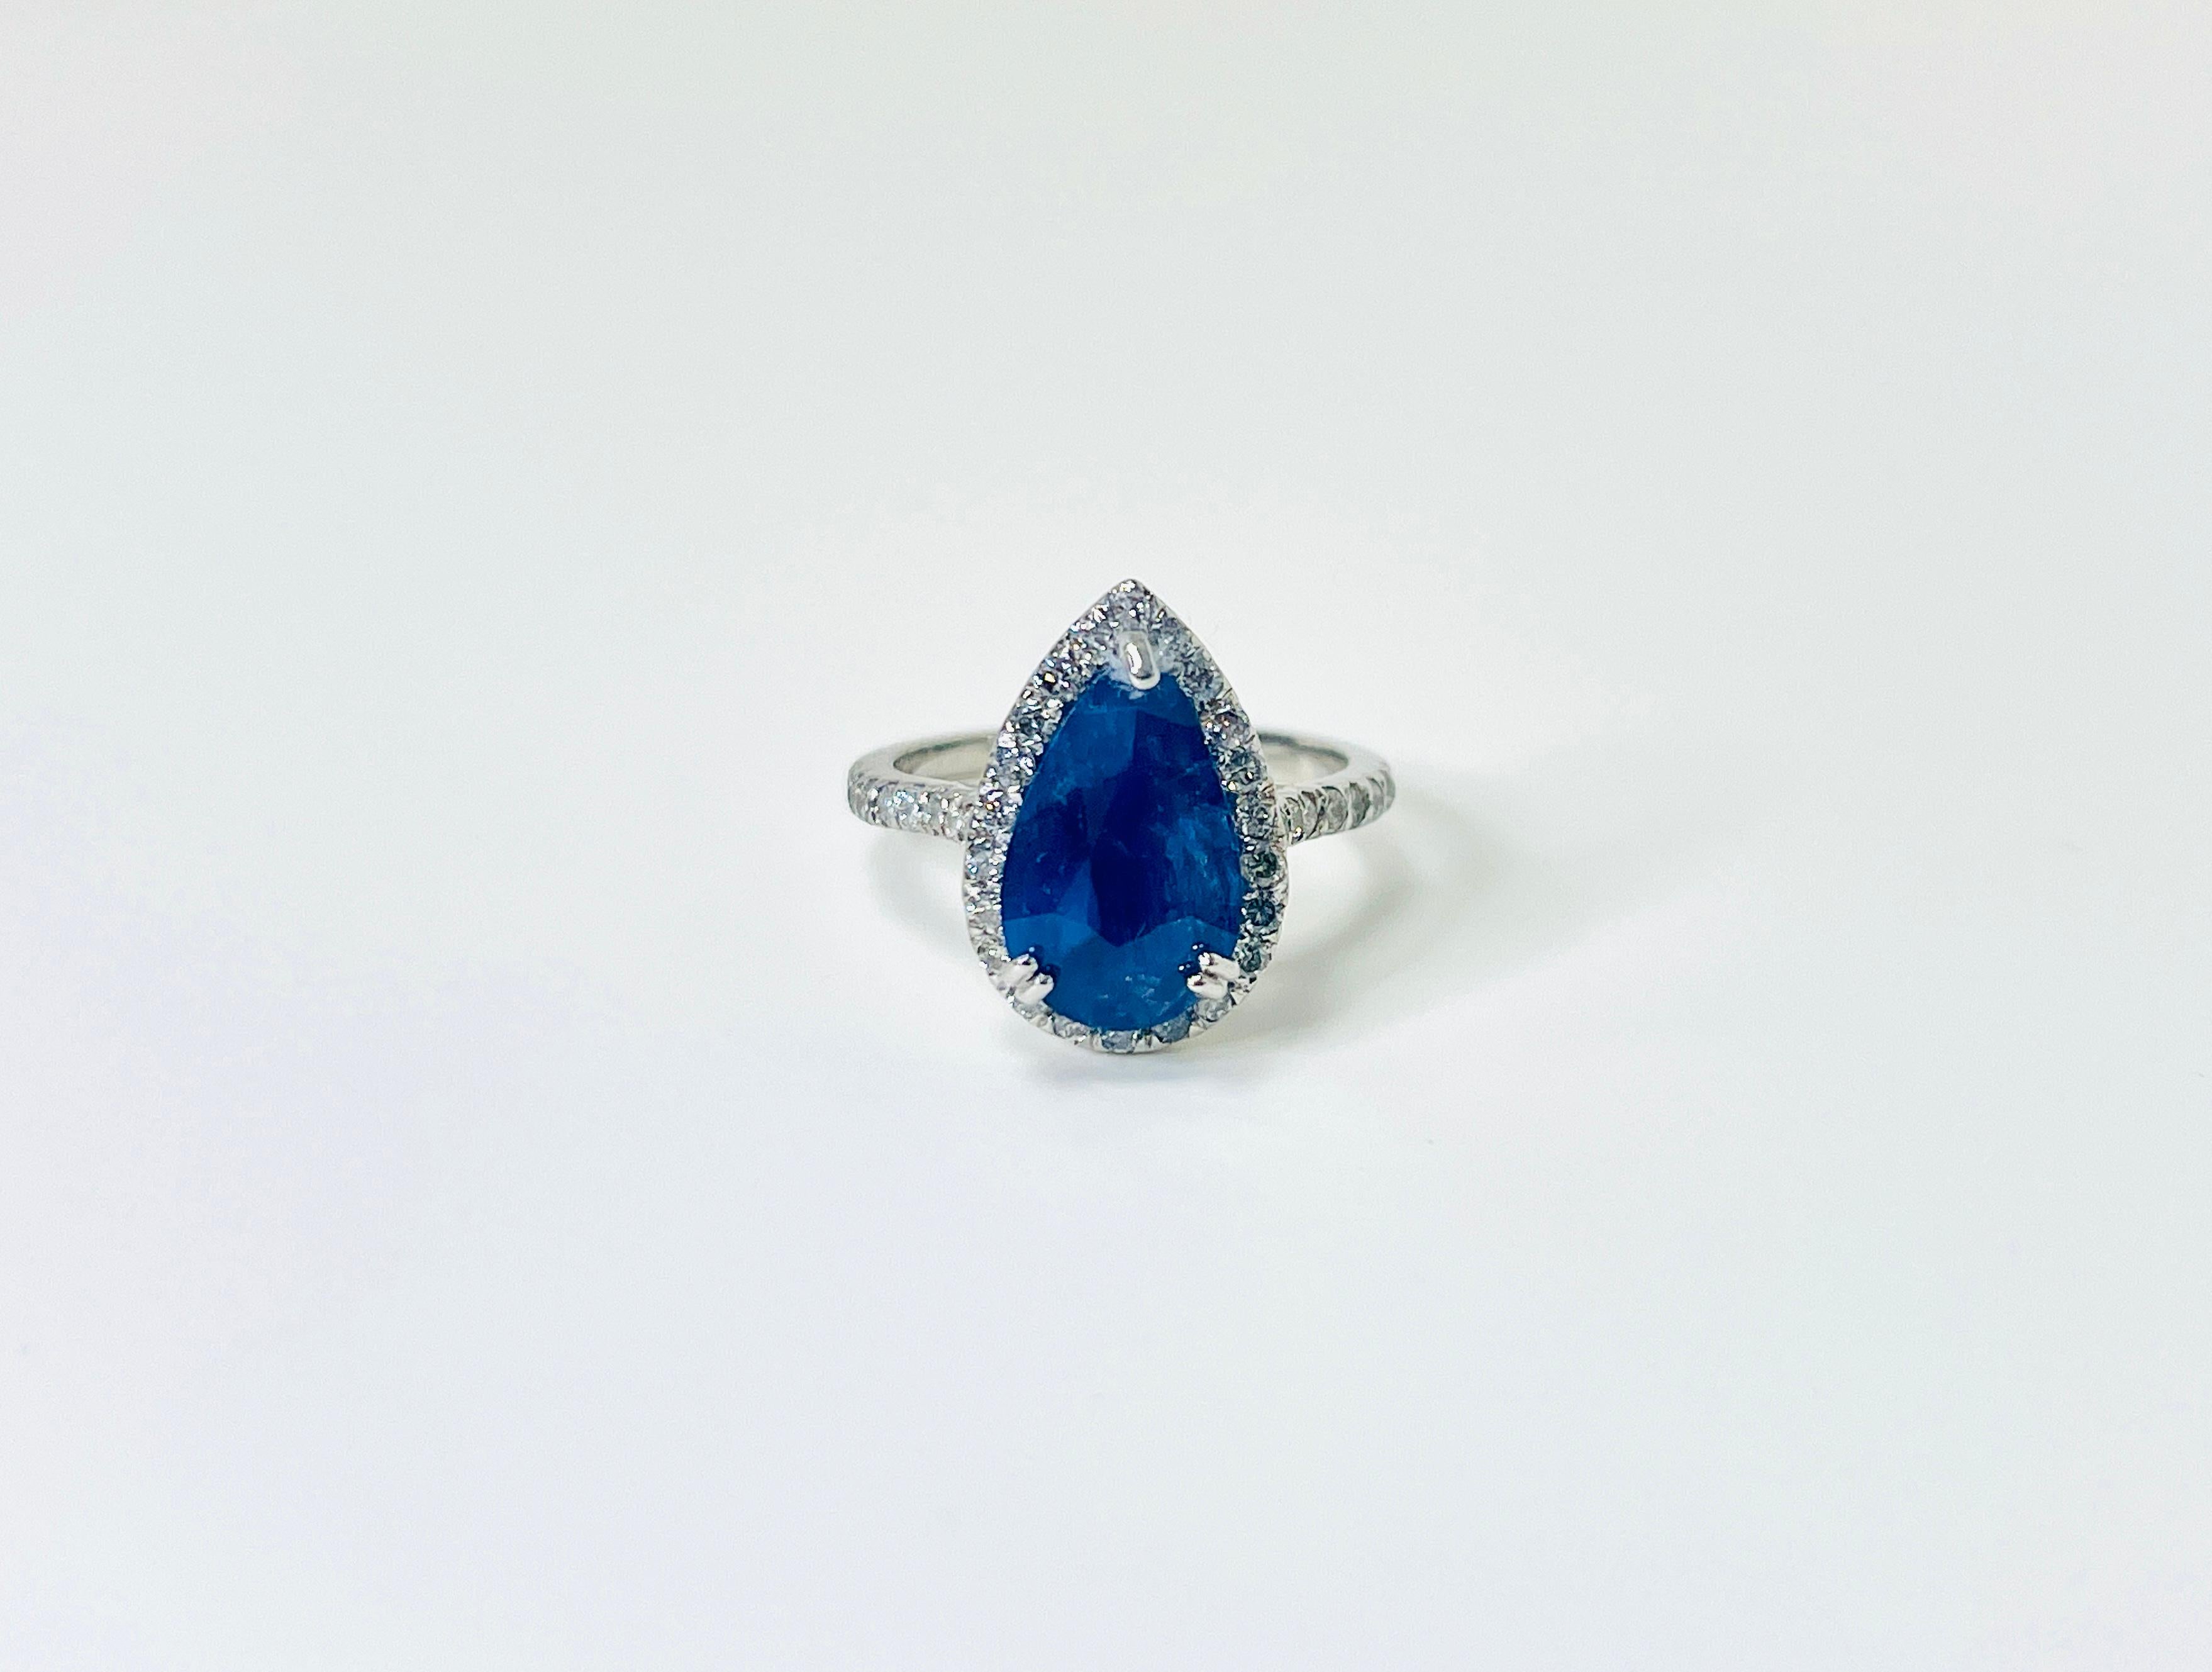 3.65 Carat Intense Blue Pear Shape Cut Natural Sapphire Diamond 14K White Gold Ring

3.65 Carats Natural Sapphire Center Stone
0.65 Carats 39 Pieces Diamonds
Average G-I, 4.35 grams, size 6.5

*Free shipping within the U.S.*

